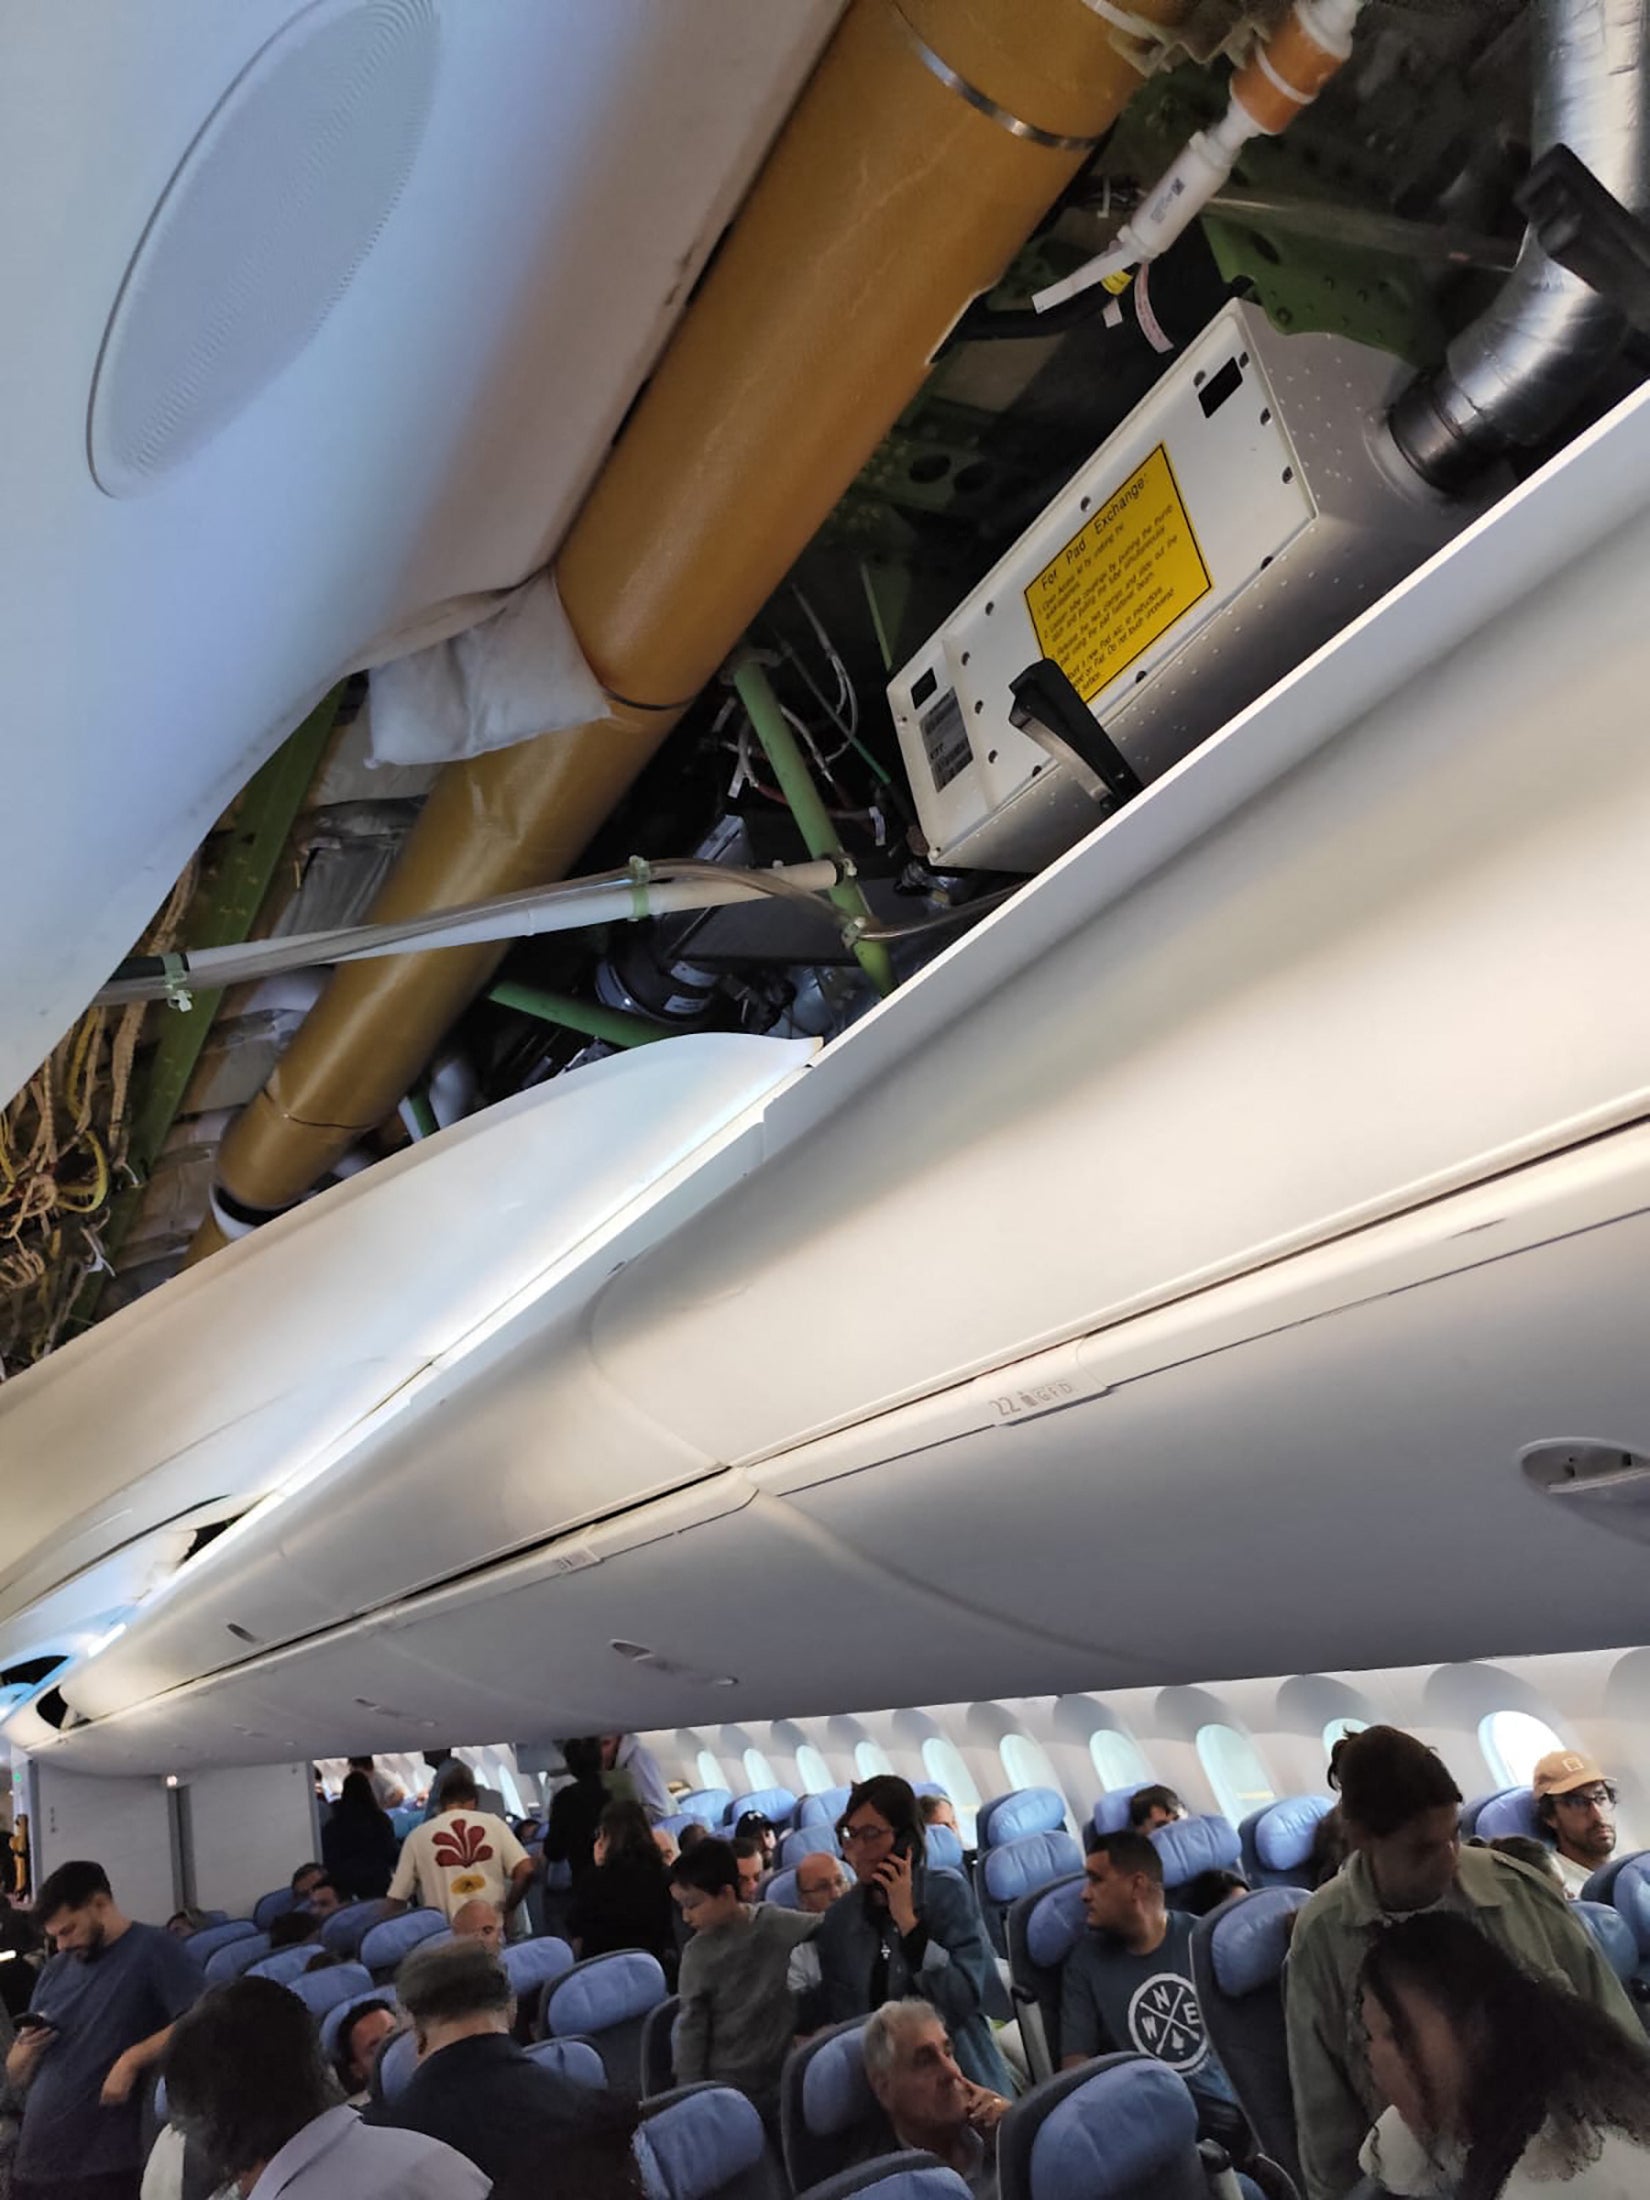 The inside of the Air Europa Boeing 787-9 Dreamliner after it landed in Brazil